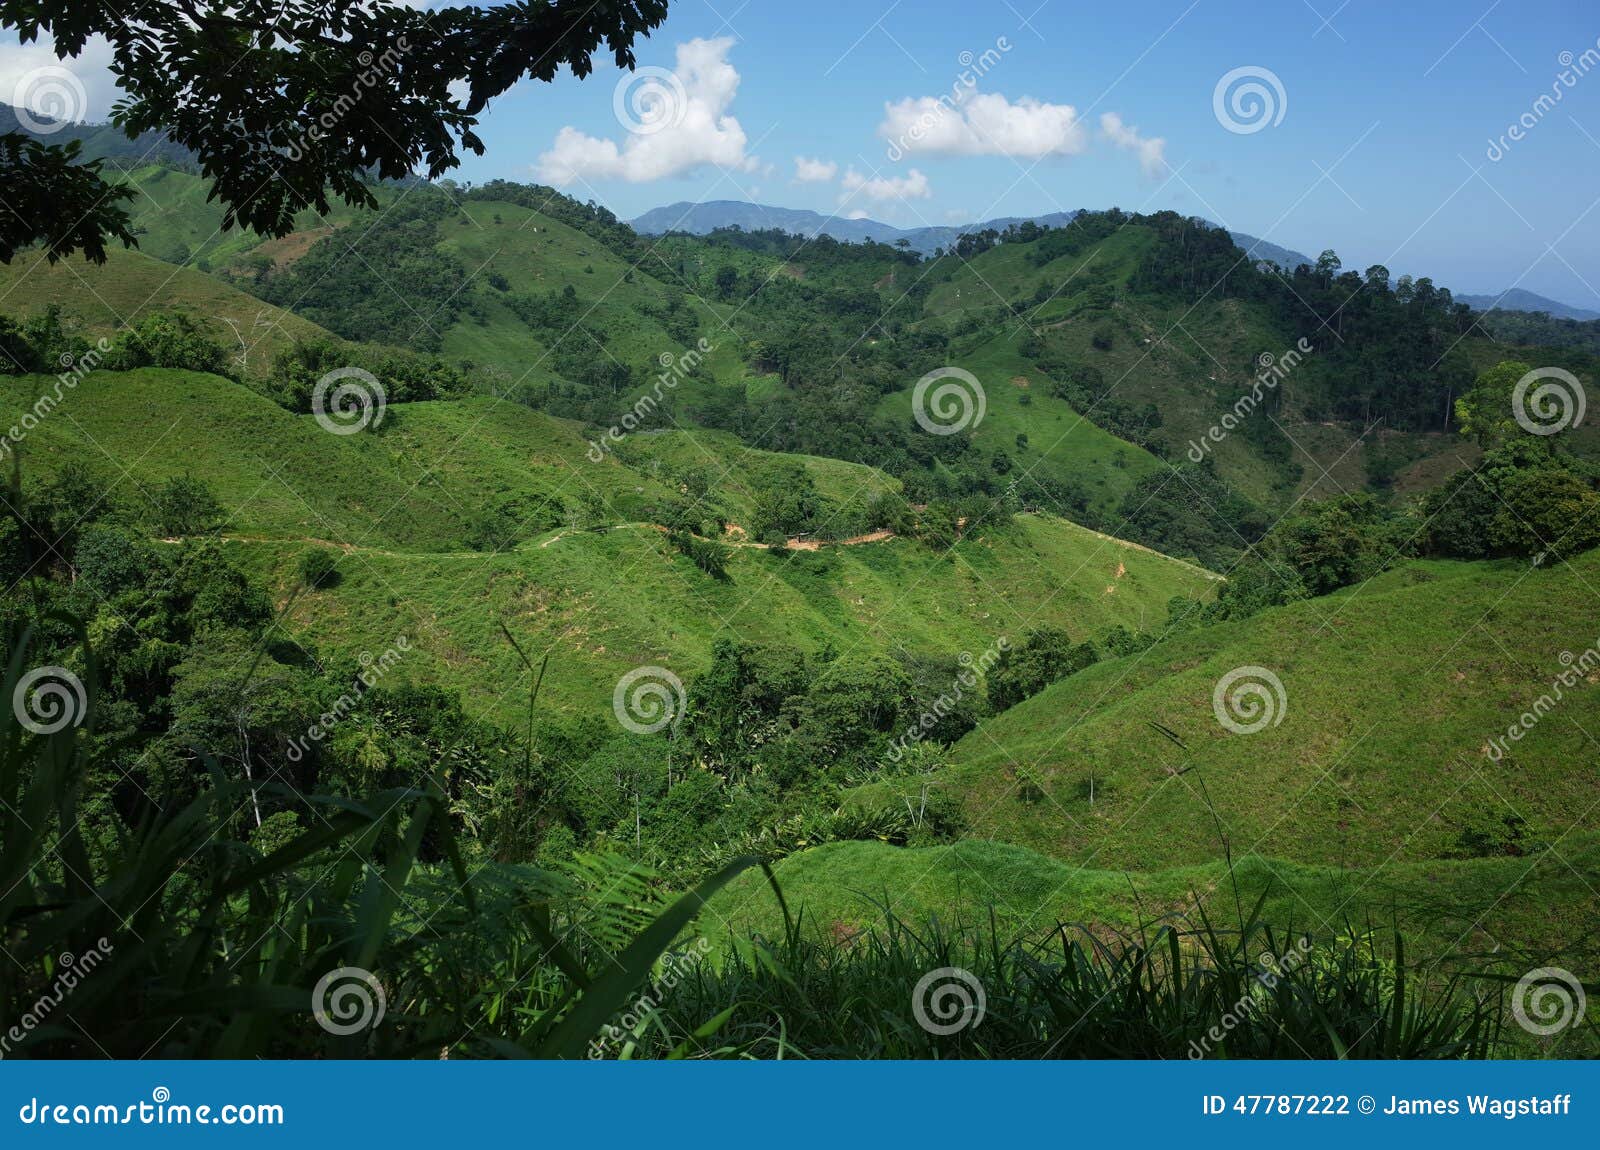 green hills of the sierra nevada, colombia